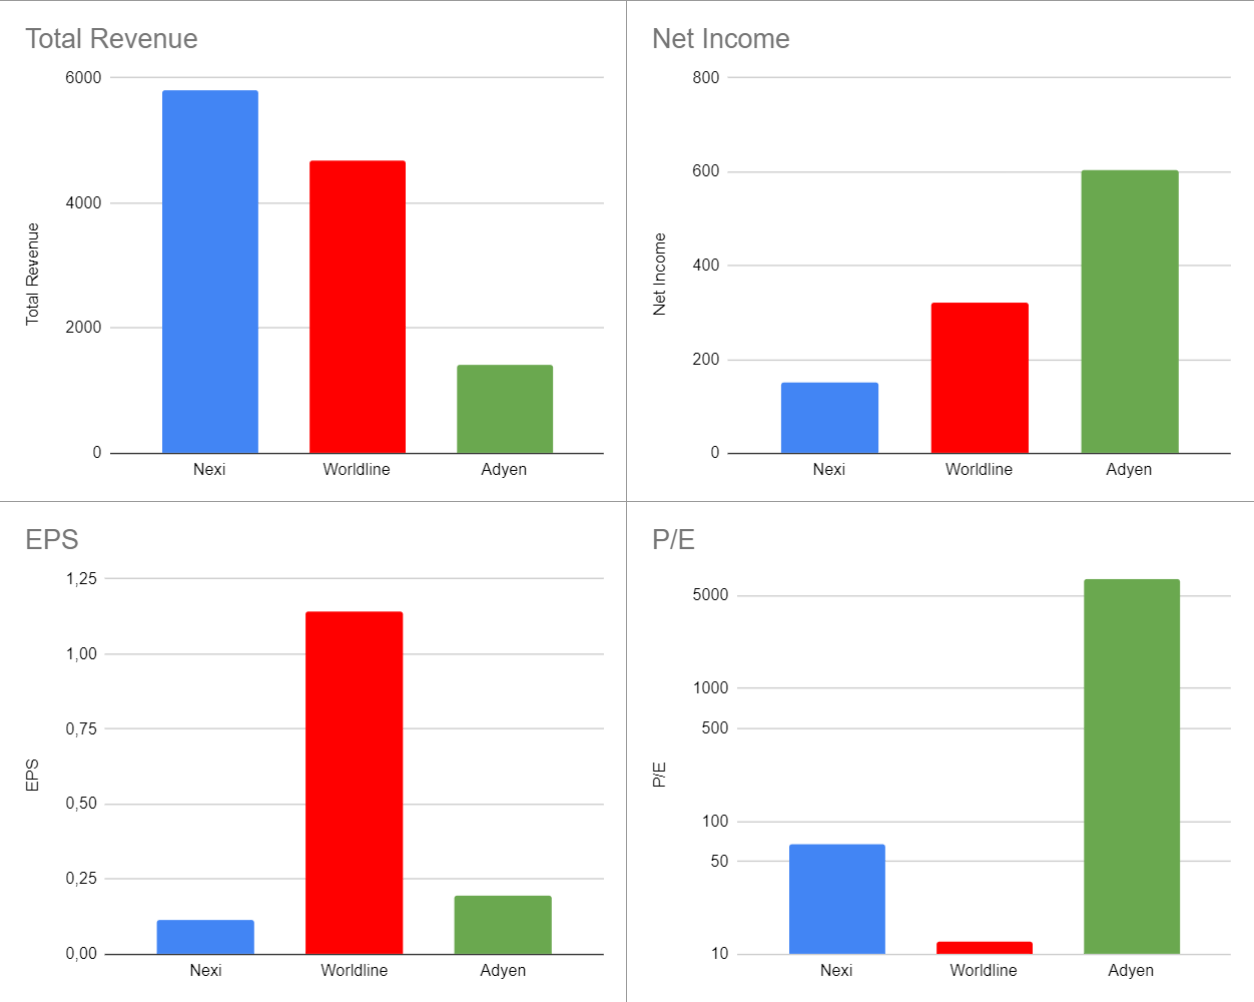 Financial comparison between Nexi and others companies